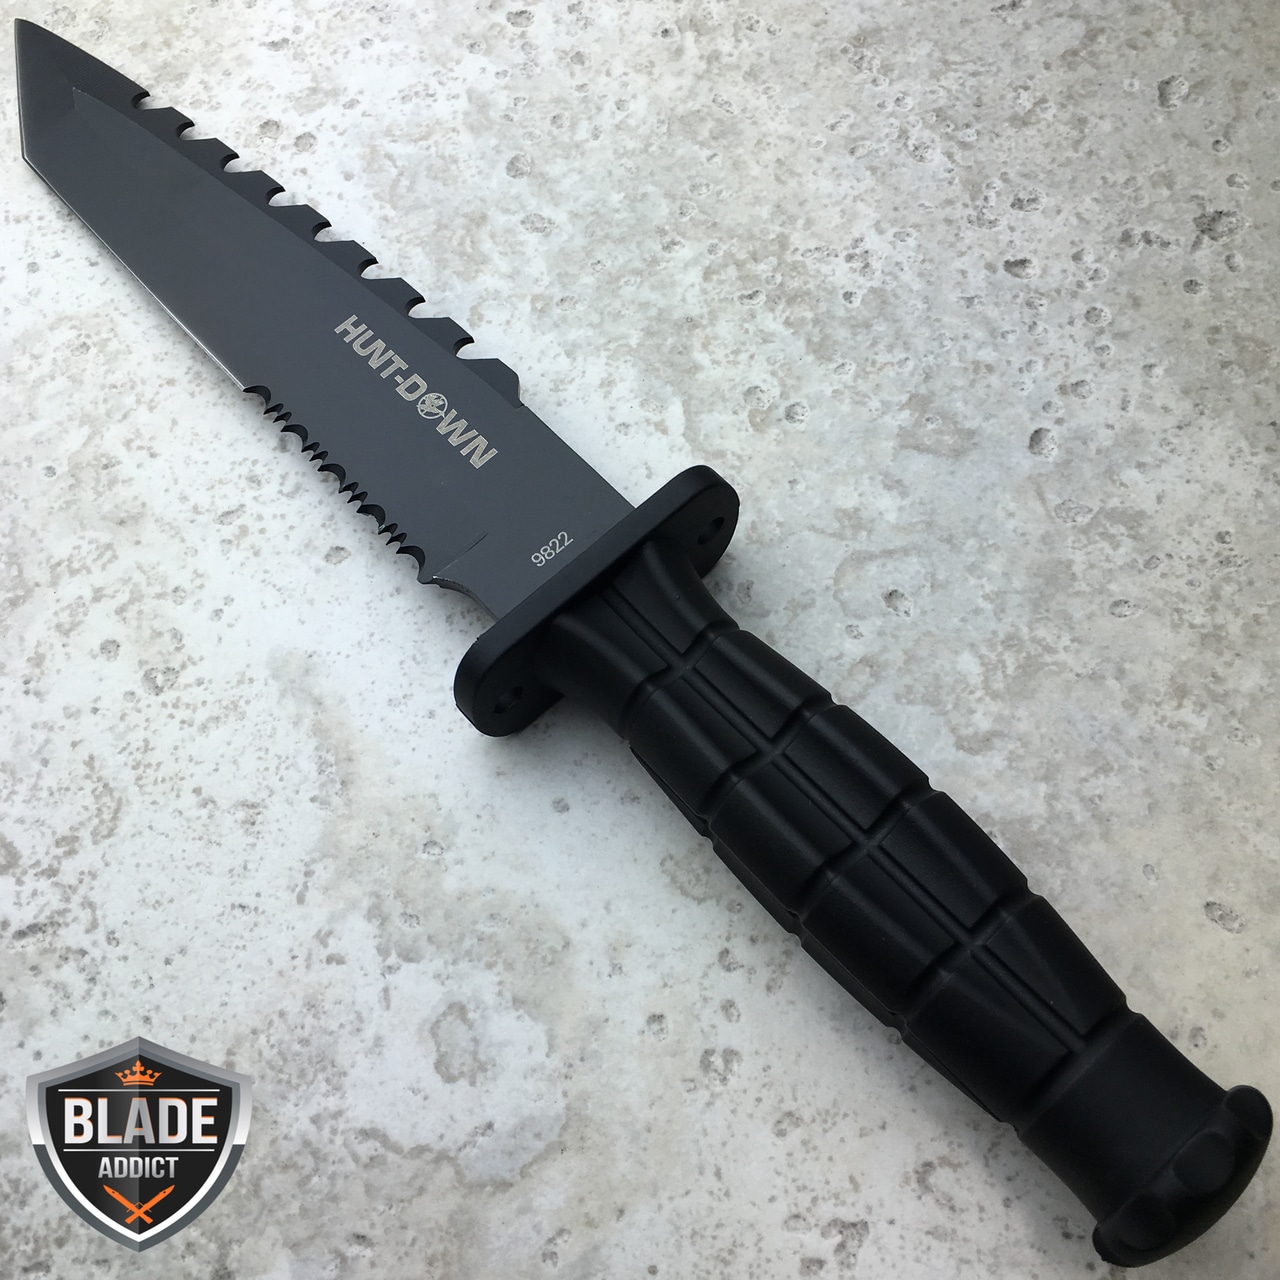 12" TACTICAL BOWIE SURVIVAL HUNTING KNIFE MILITARY Combat Fixed Blade.